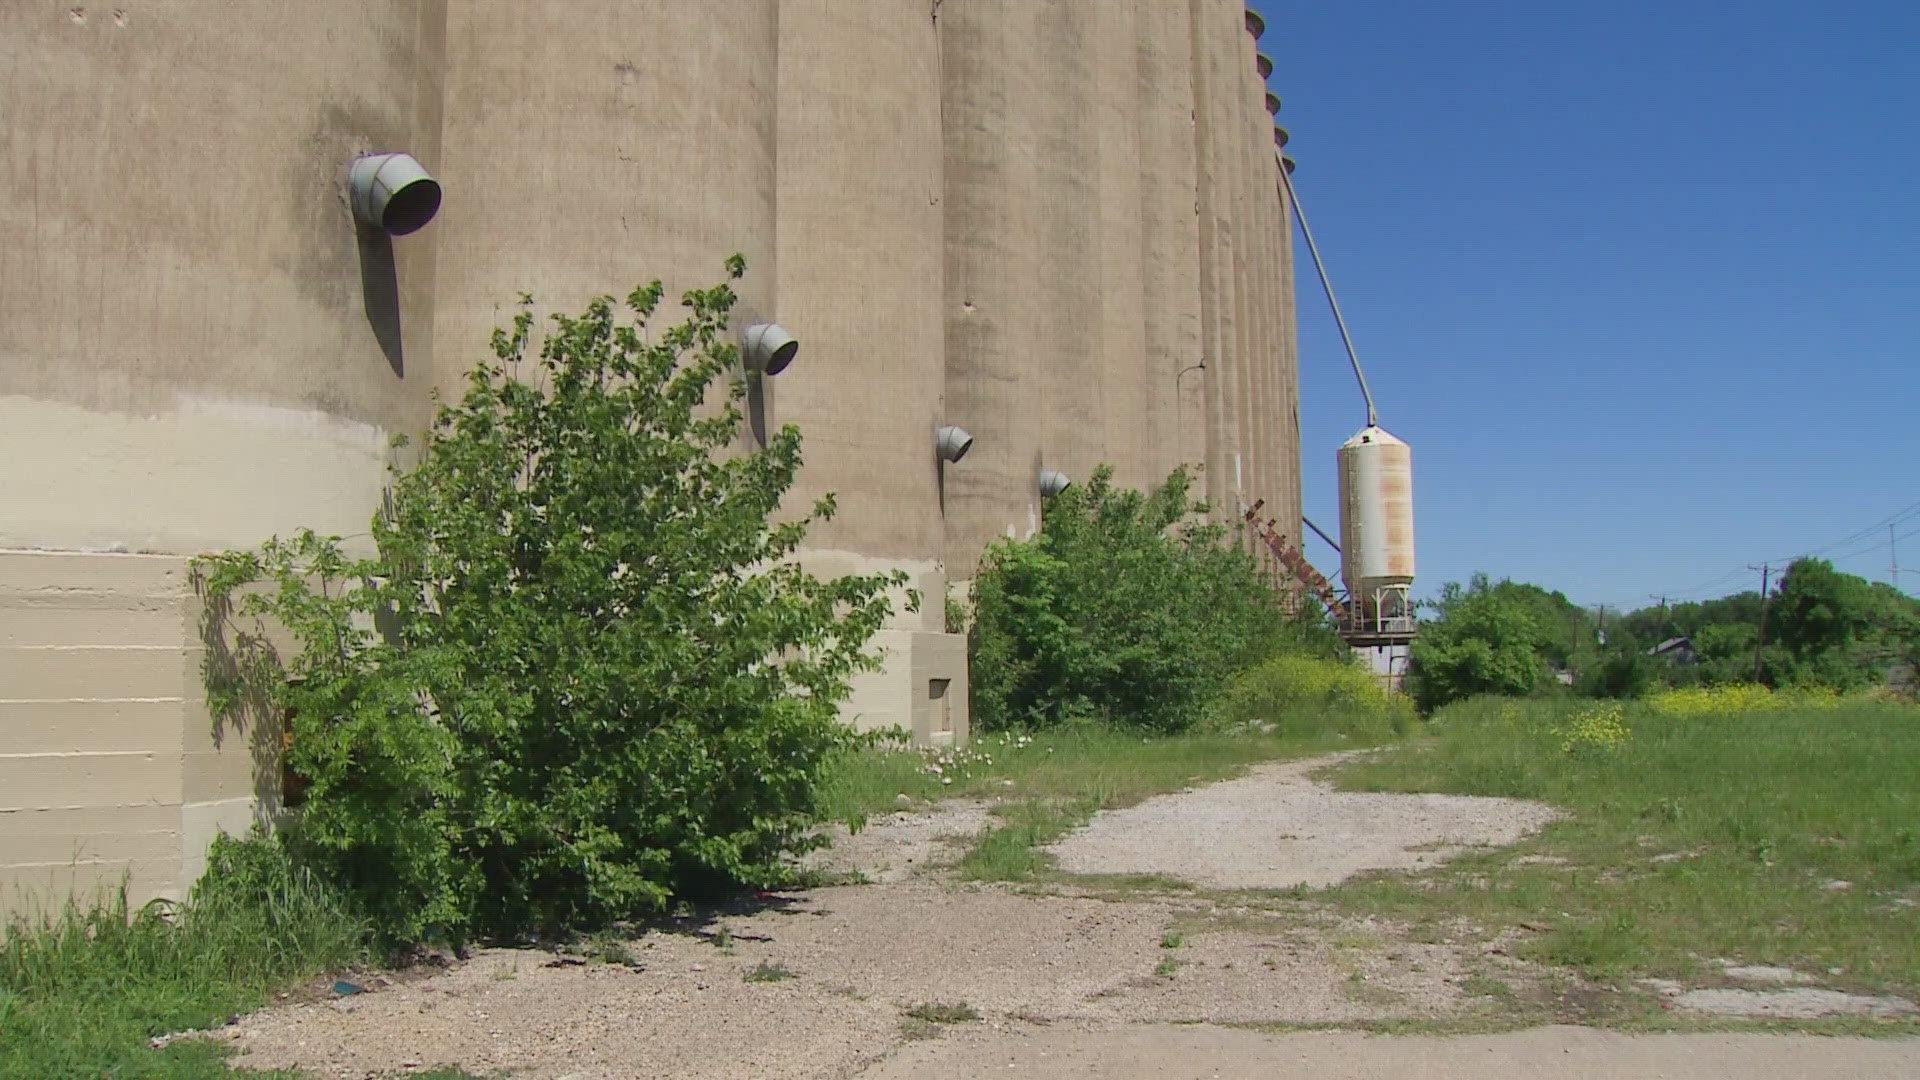 The city's Building Standards Commission in March declared the silos hazardous, a key step toward demolition.